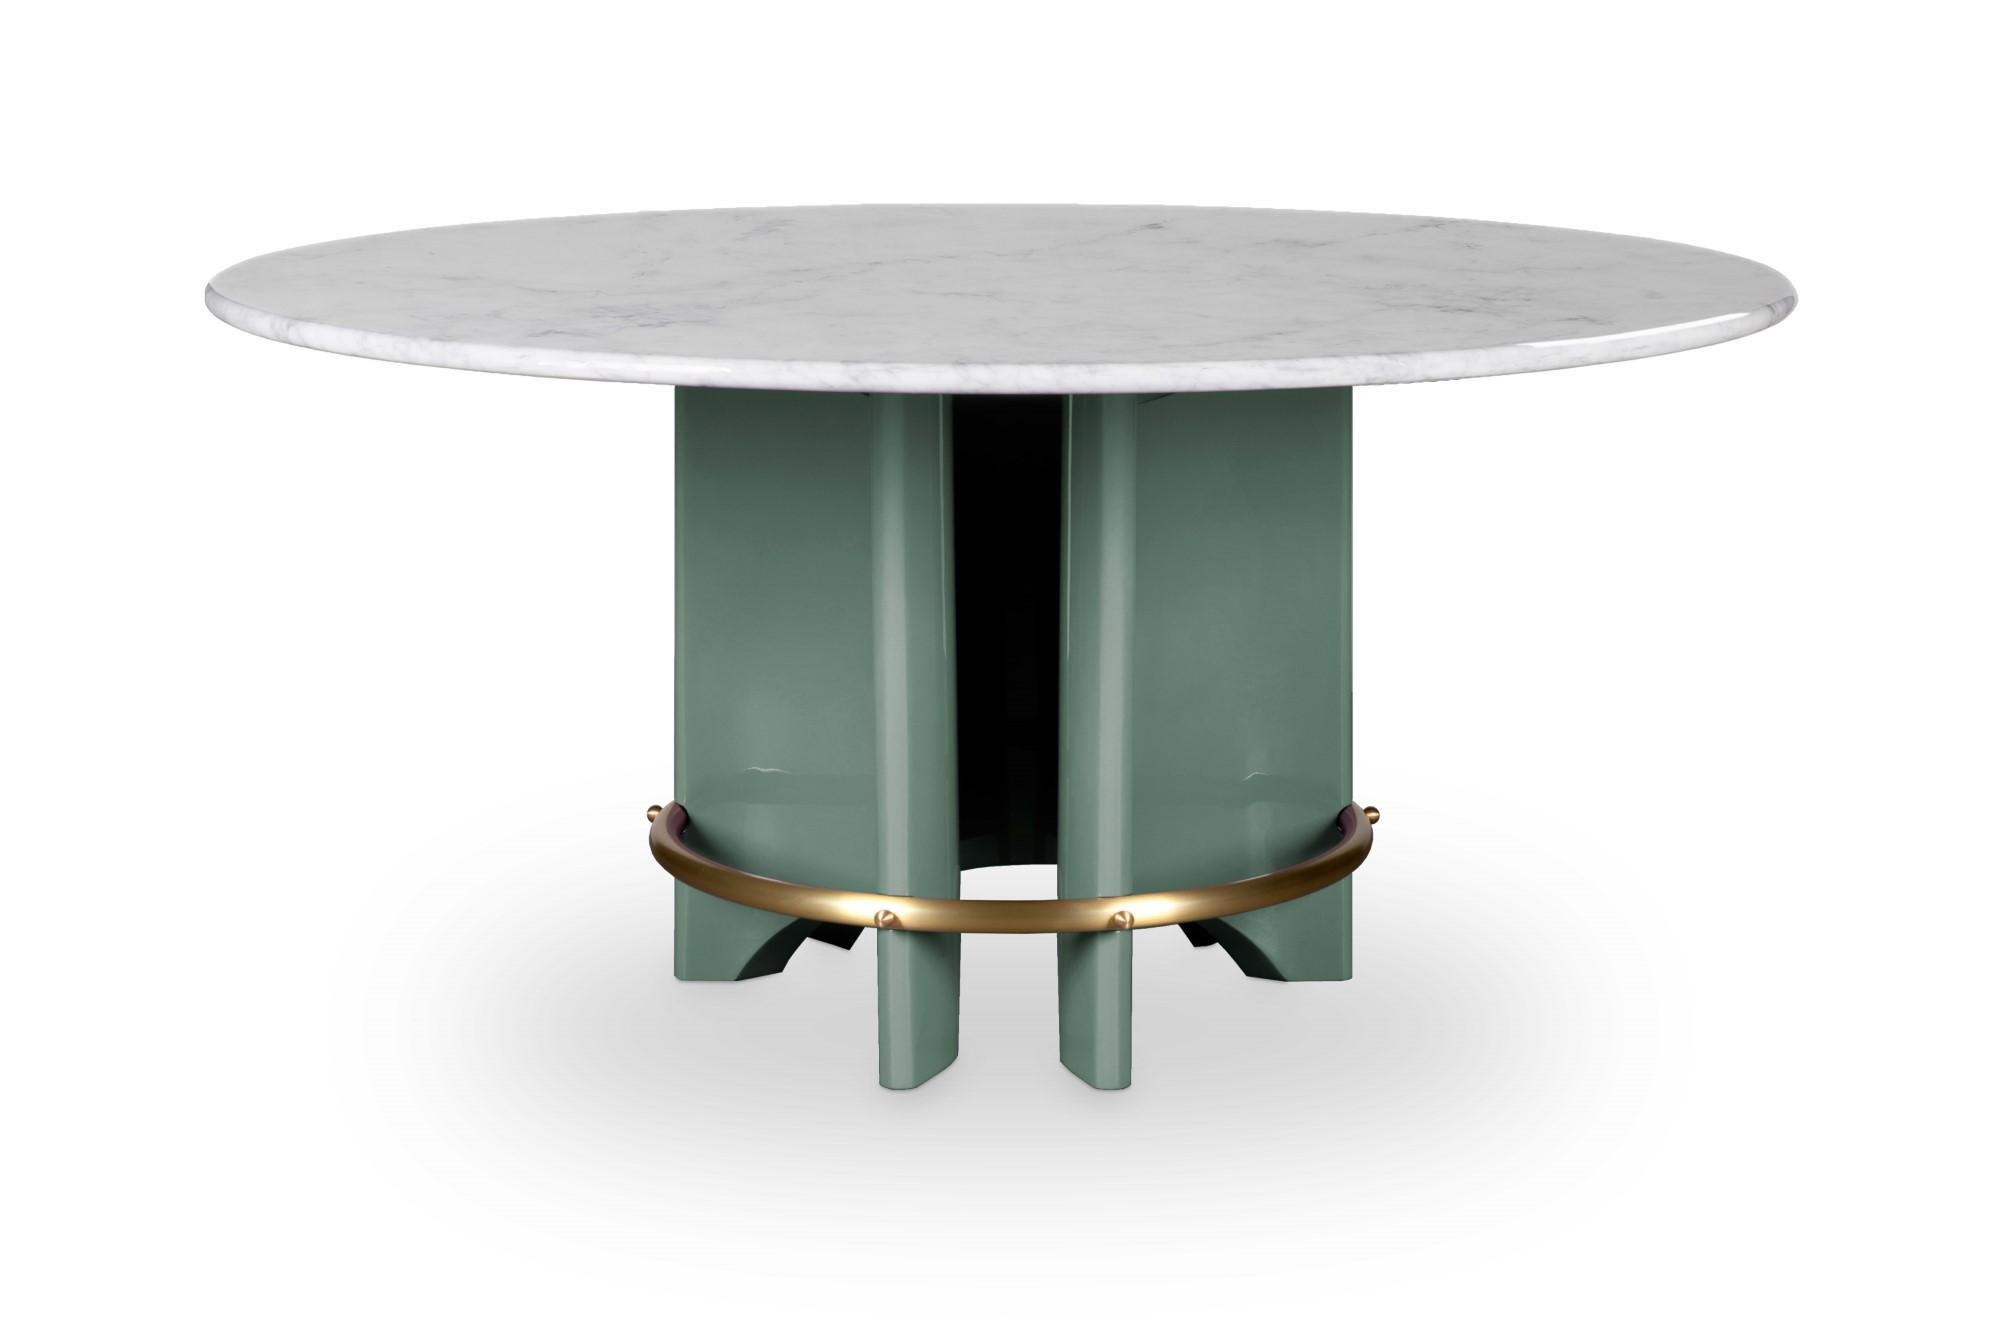 Meyer table by Royal Stranger
Dimensions: D 160 x W 160 x H 75 cm.
Materials: Carrara marble with polished finish, lilac lacquered with glossy finish base, brushed brass ring.

Available in:
Table Top: Carrara Marble, Nero Marquina, Estremoz, Rose